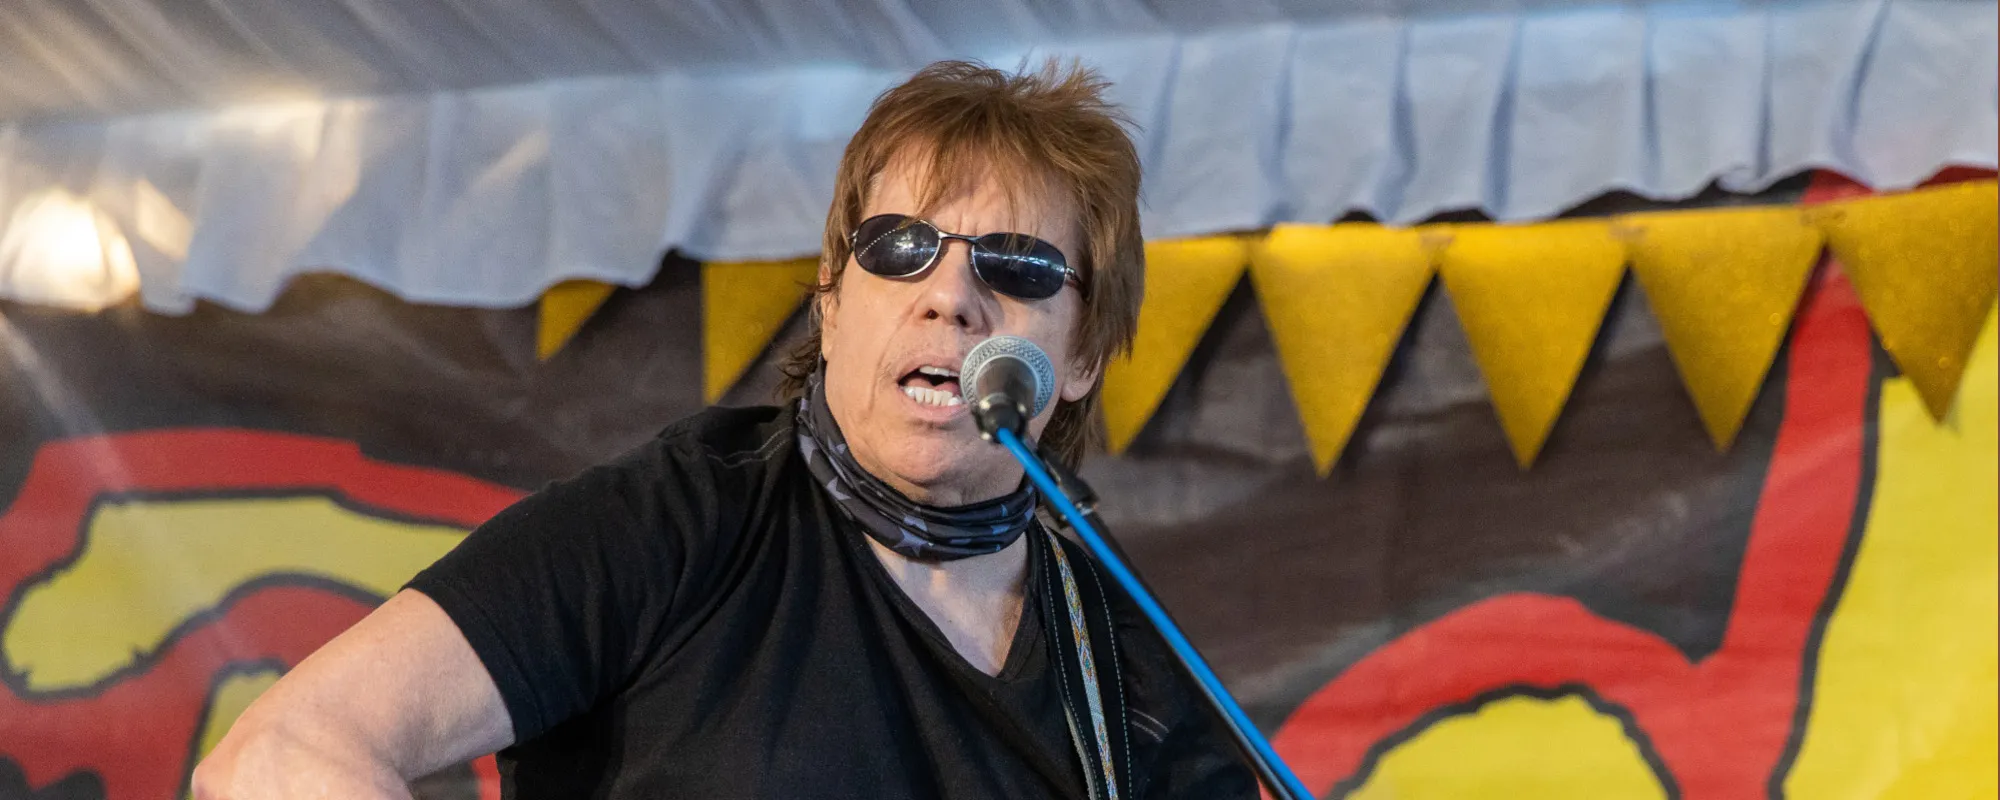 George Thorogood Forced to Cancel Shows Due to Undisclosed “Serious Medical Condition”